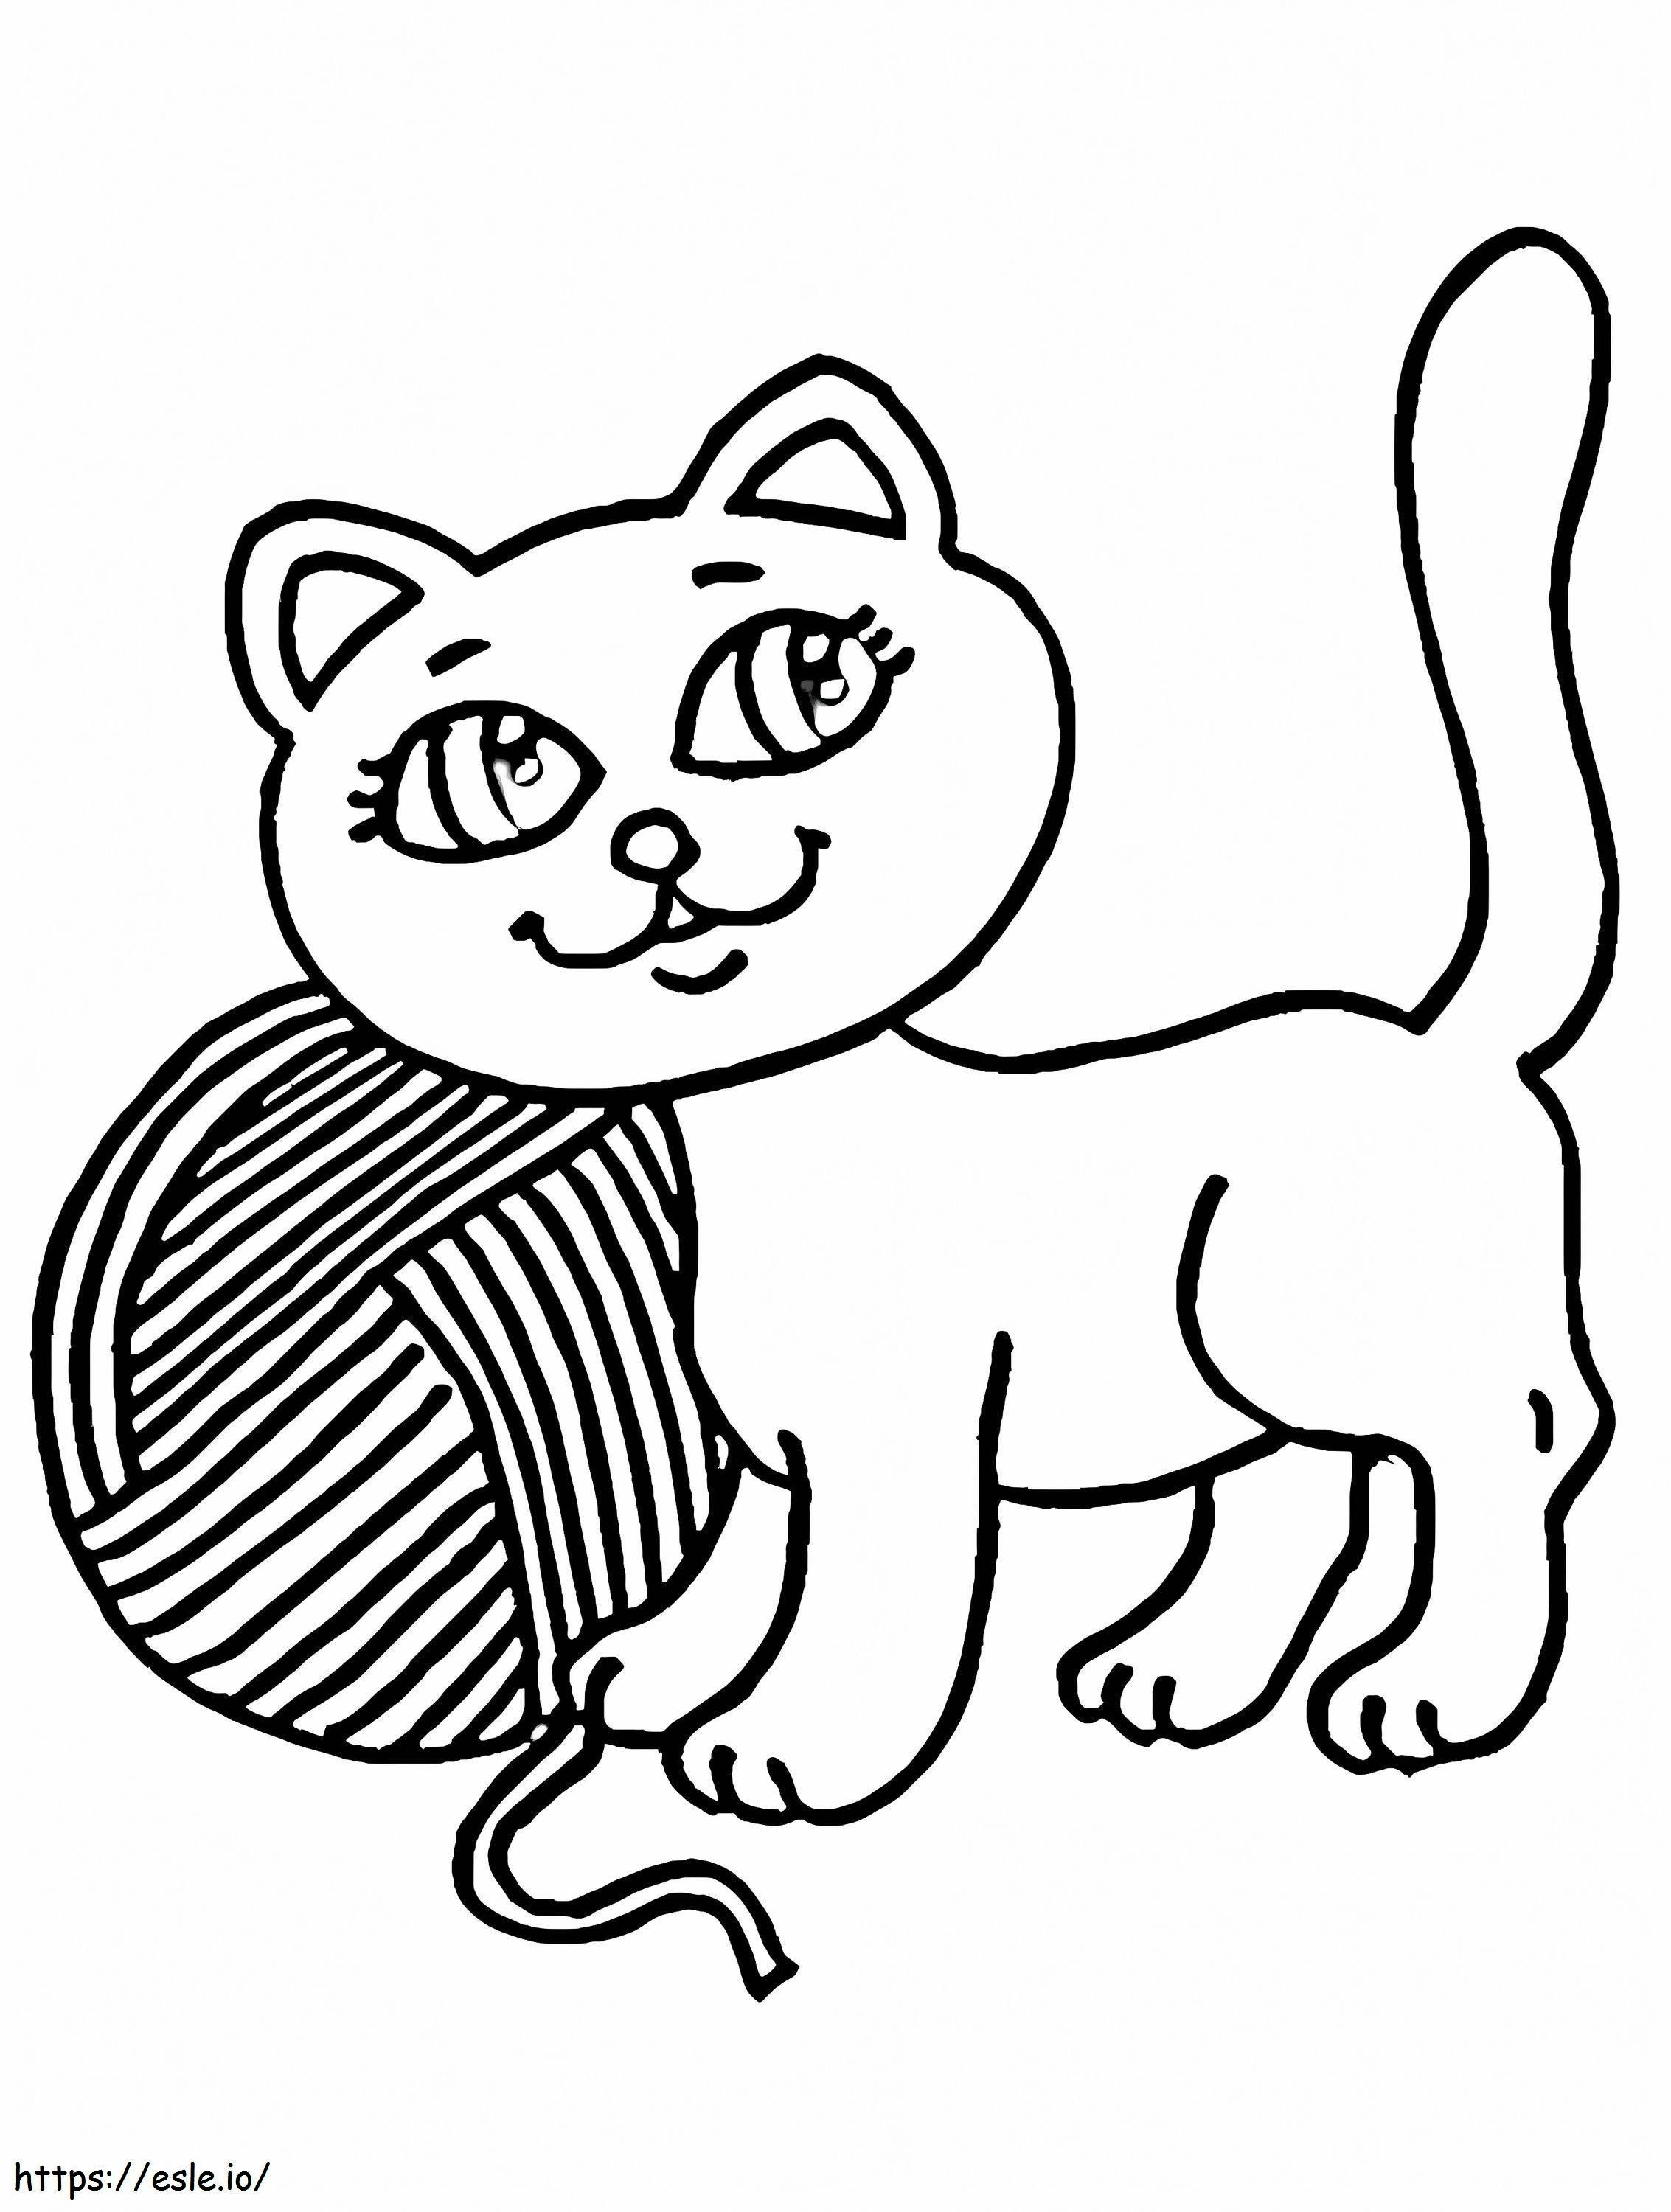 1585040253 Kitty And Yarn coloring page